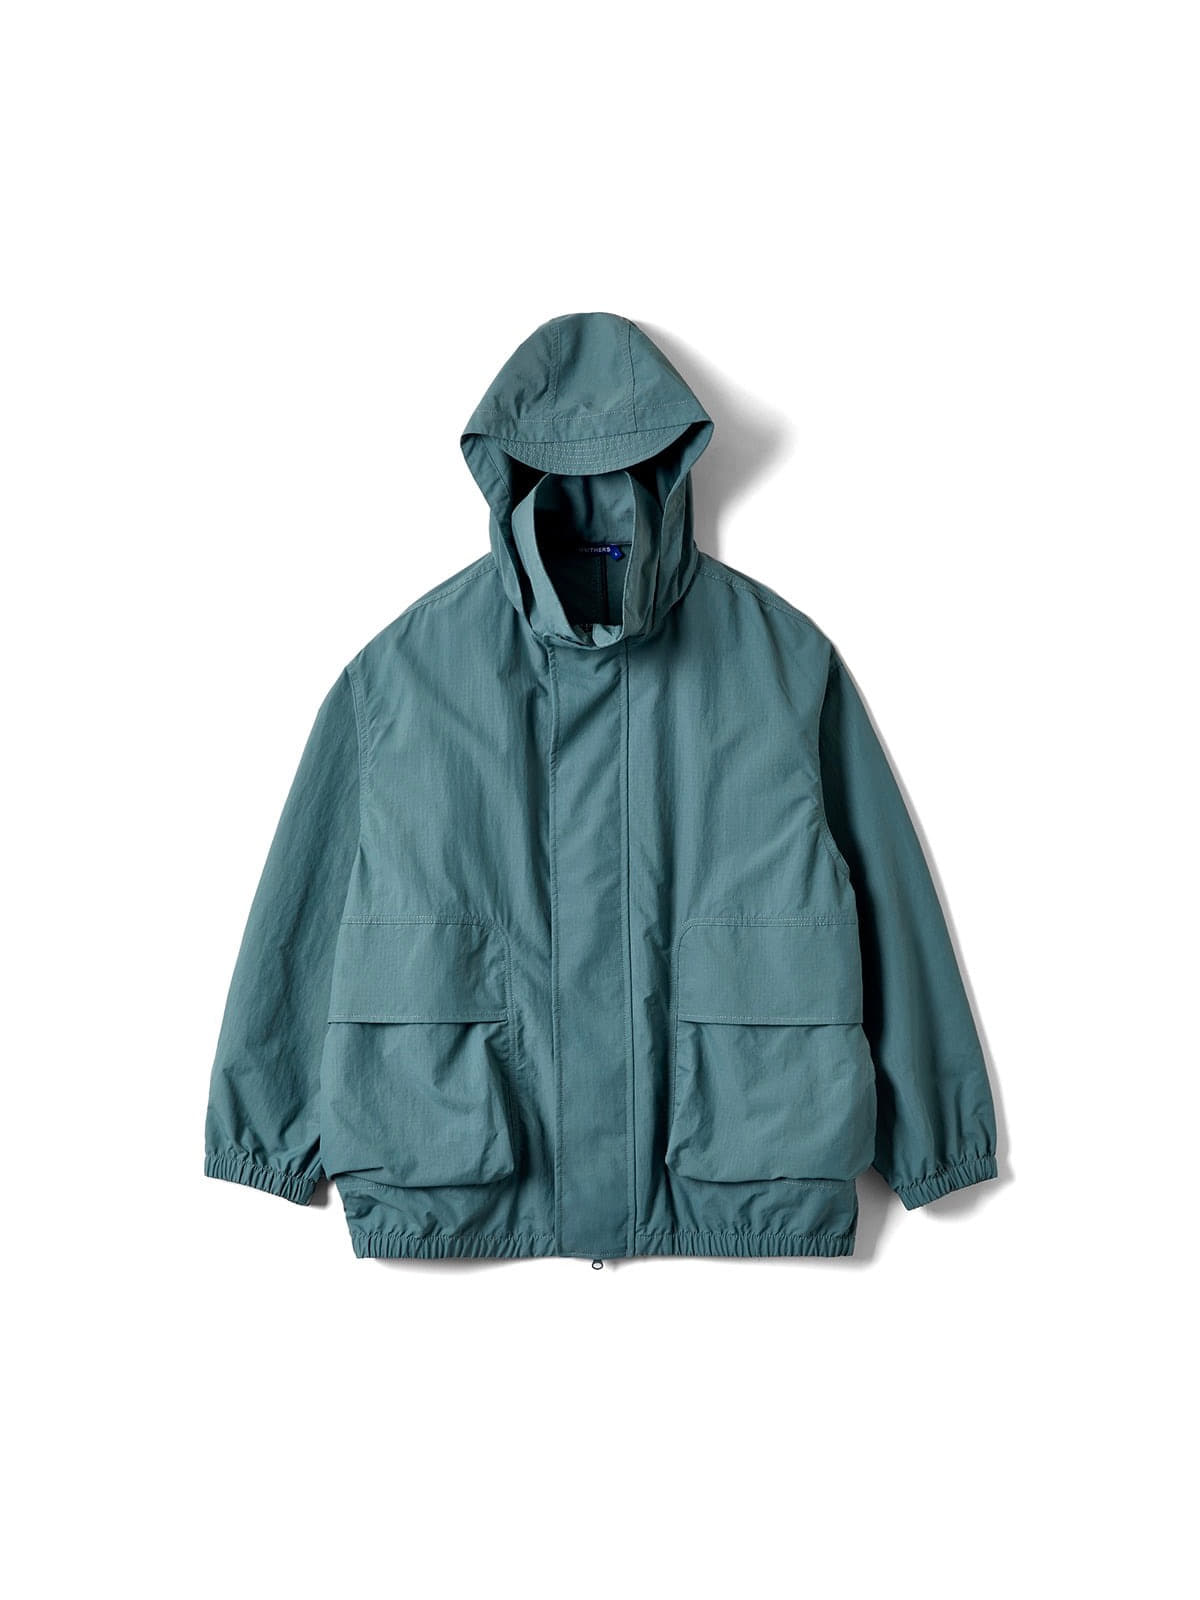 Undercover Coach Jacket (Sage Green)